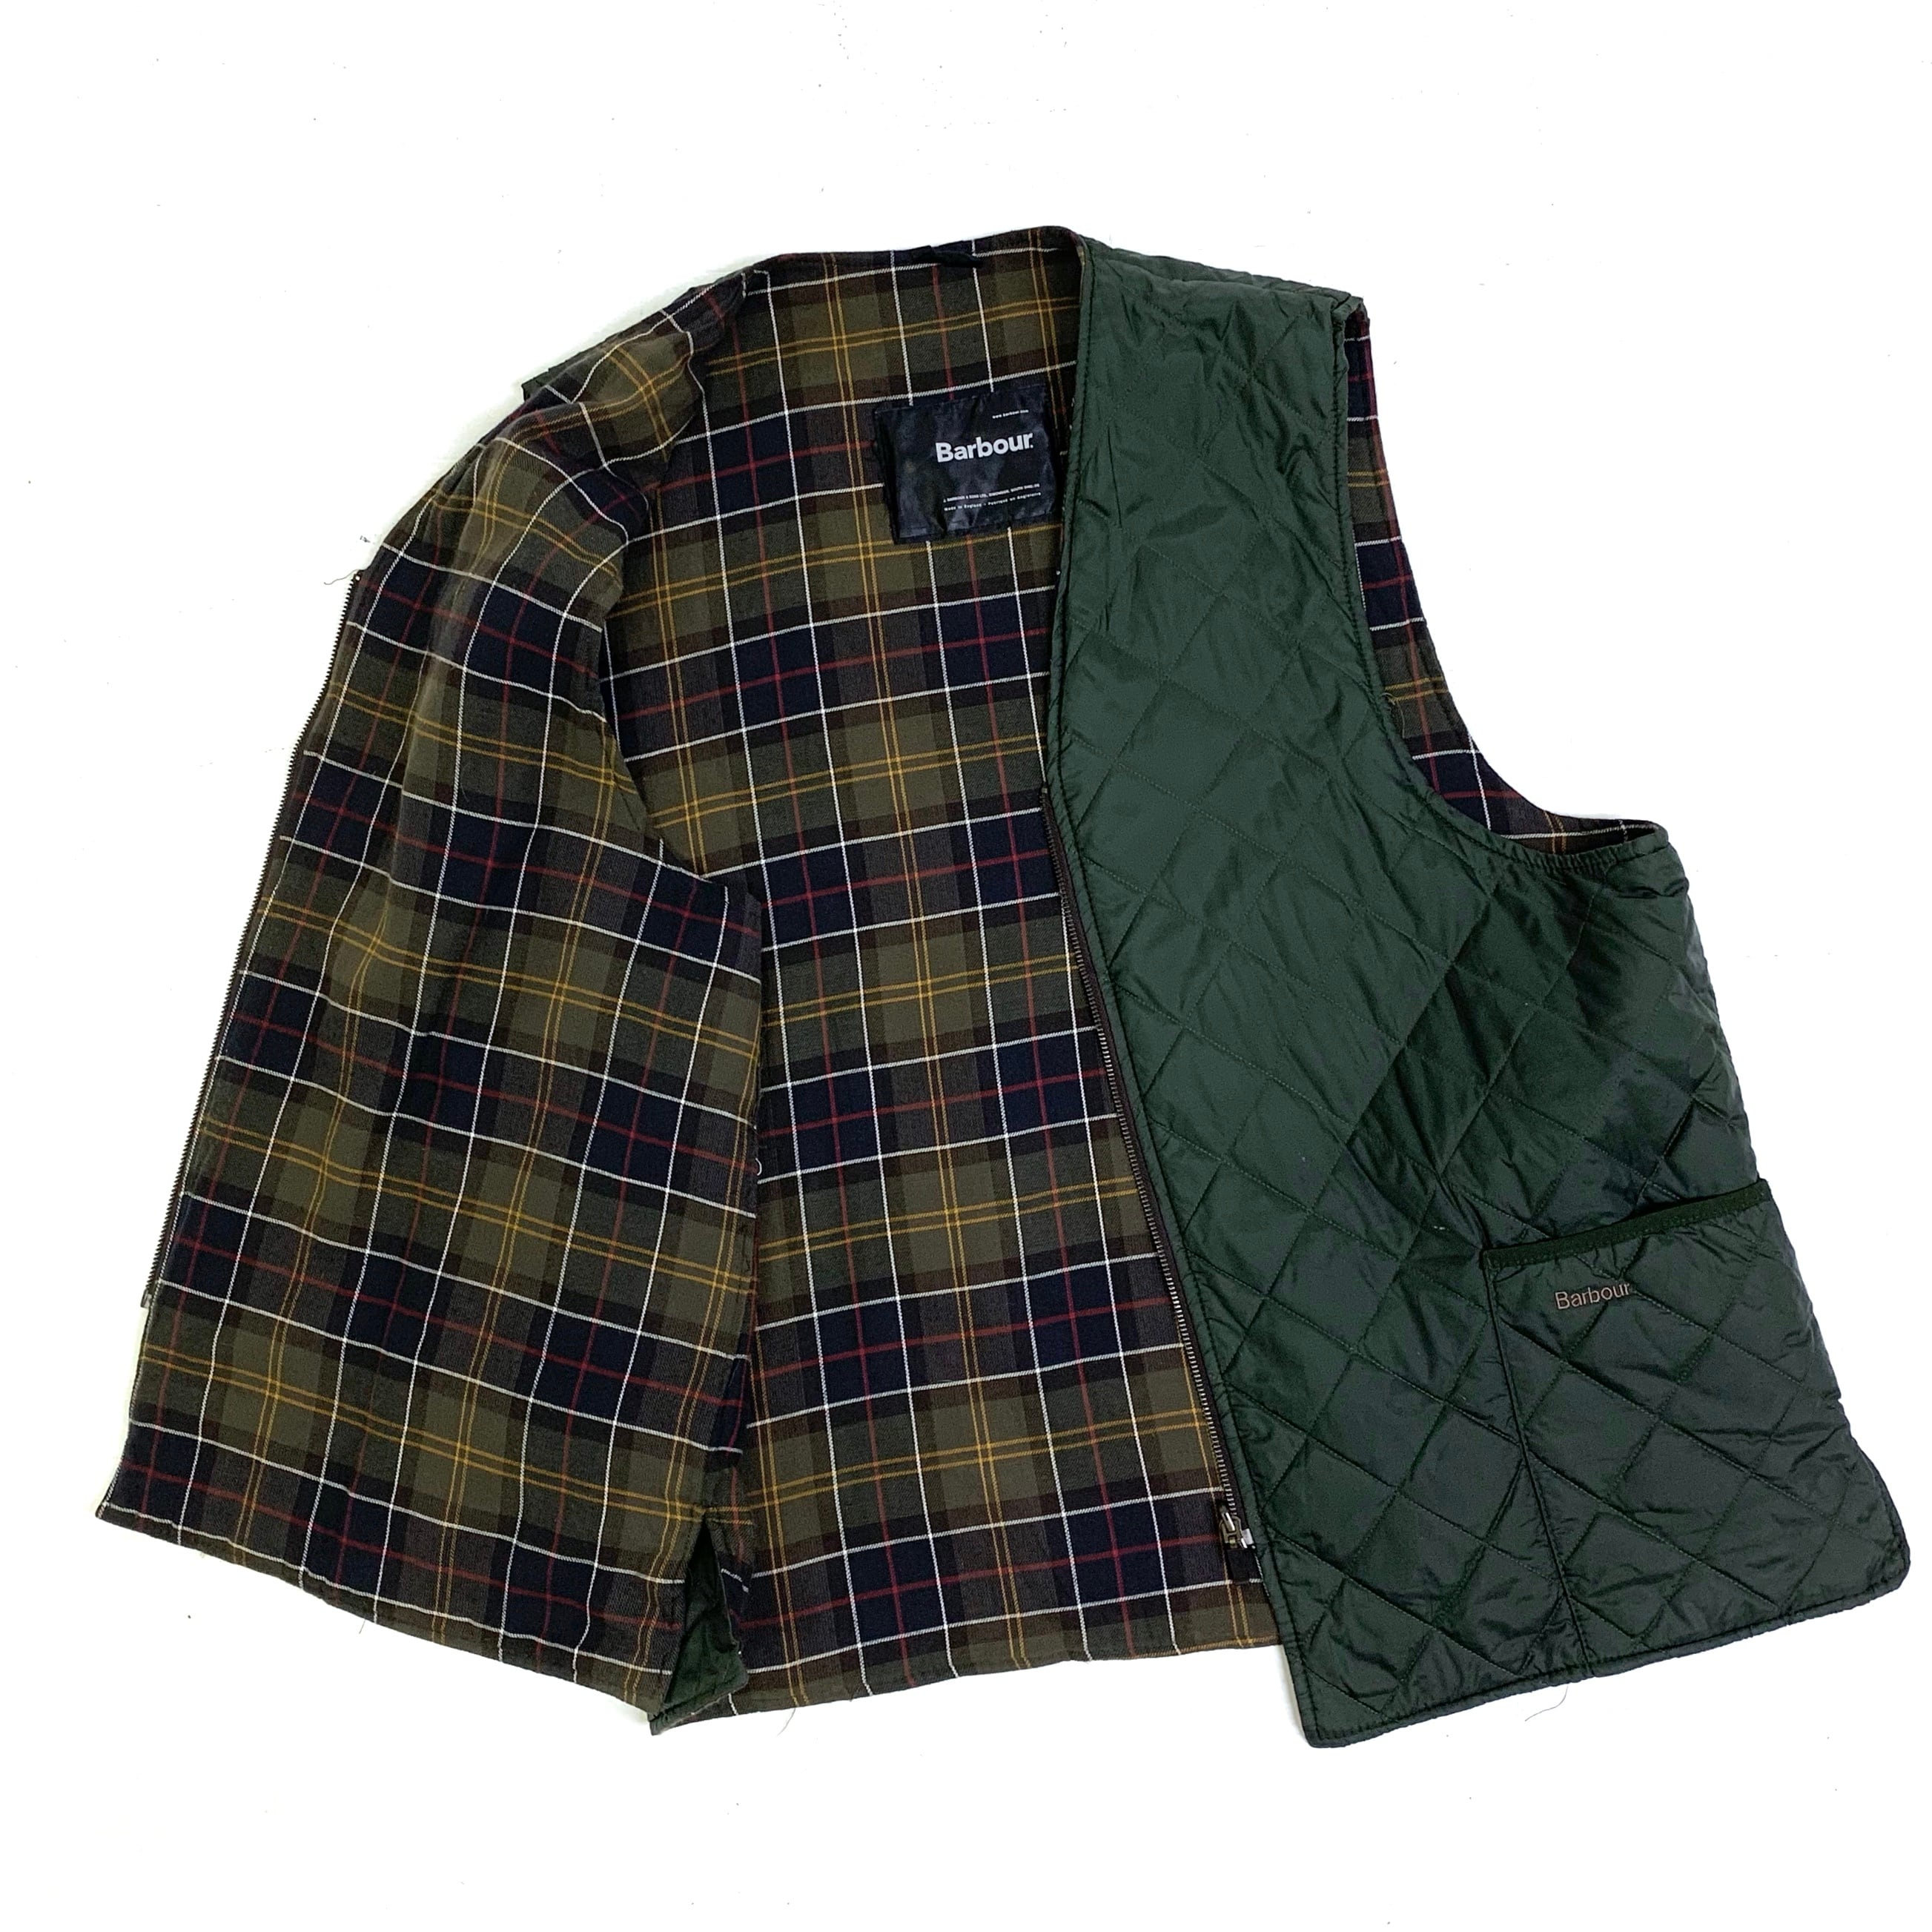 0289 / 2000's Barbour guilted waistcoat made in England モス